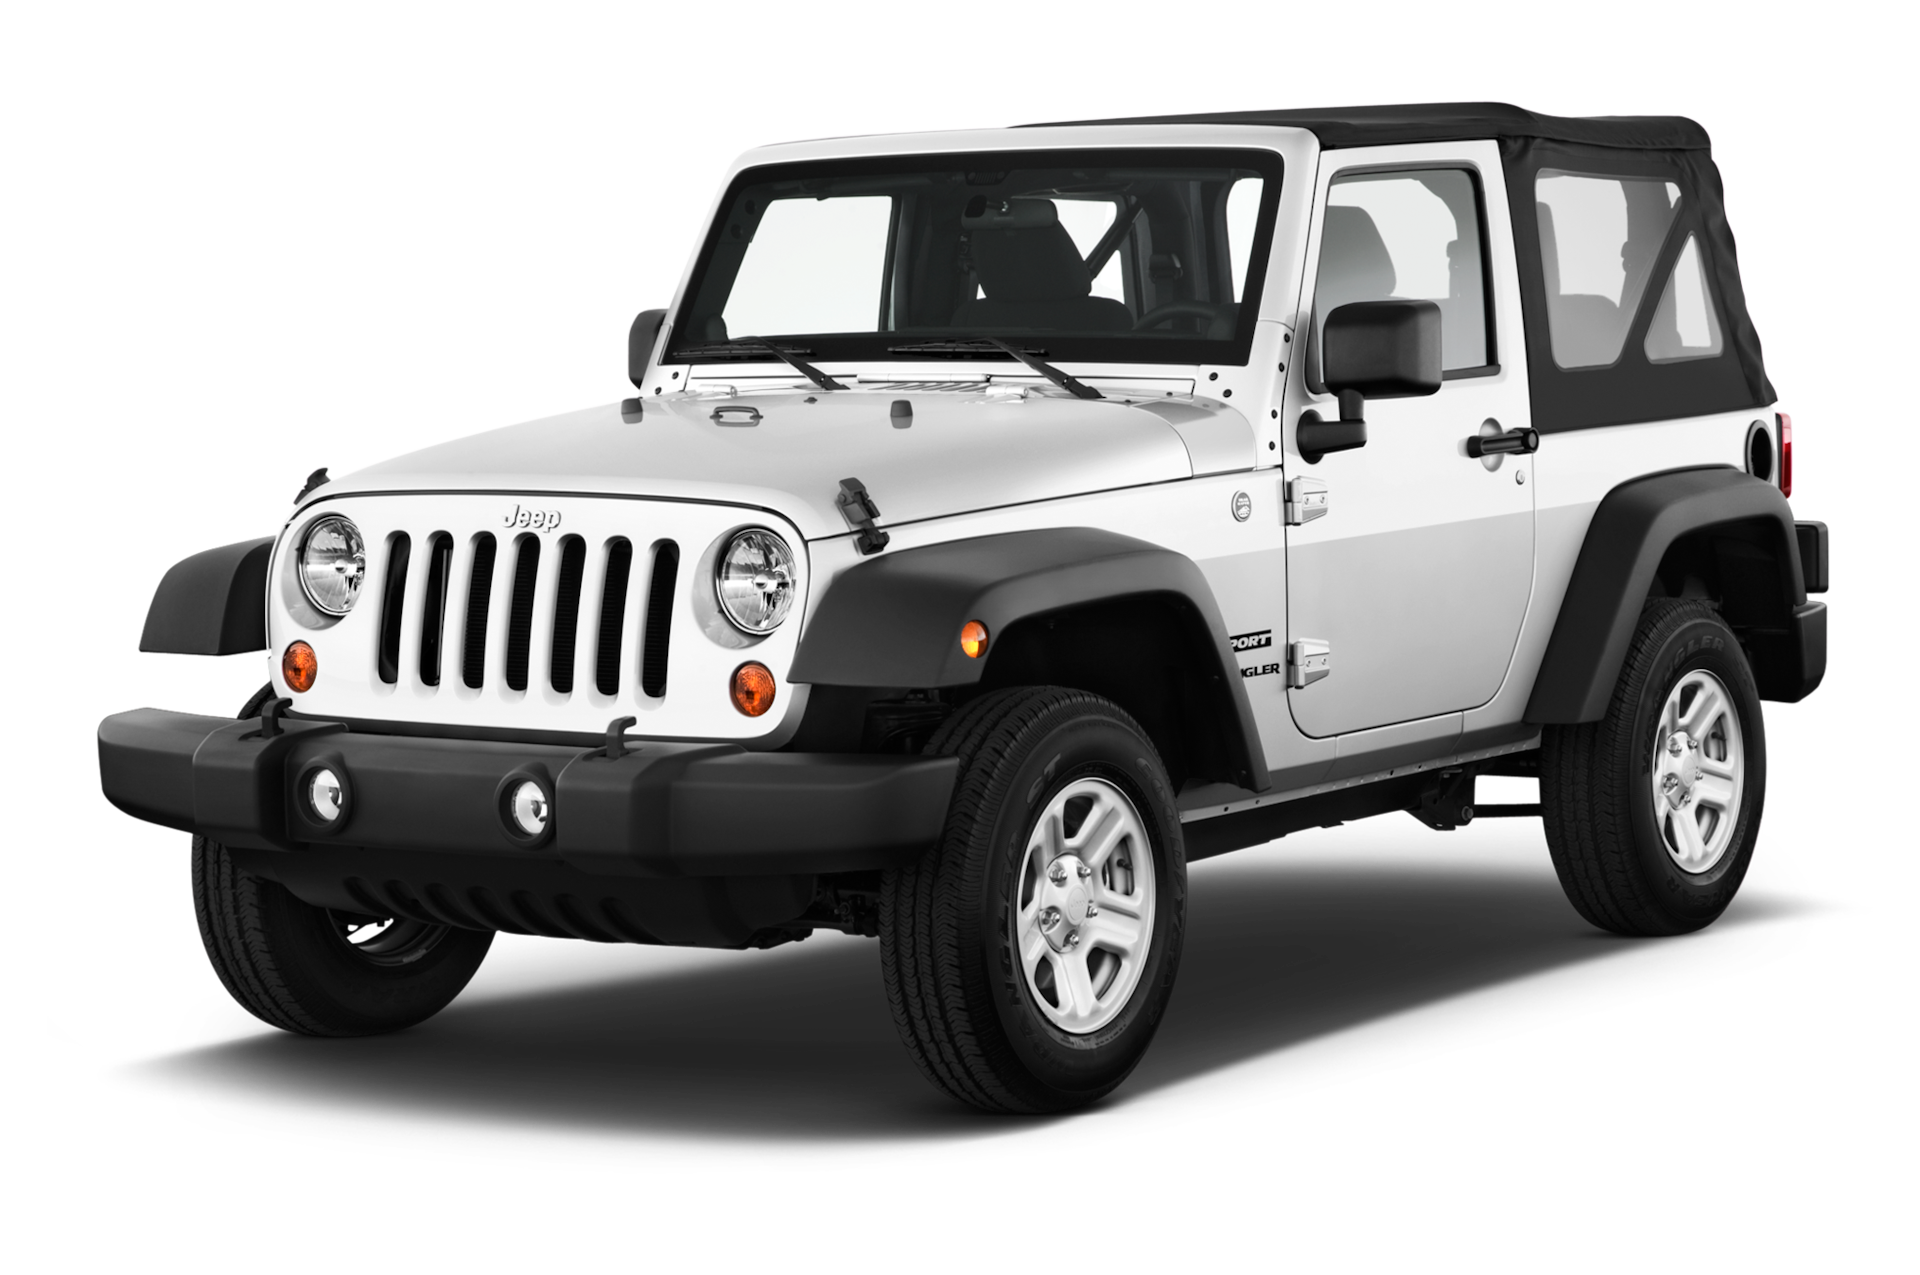 2012 Jeep Wrangler Prices, Reviews, and Photos - MotorTrend